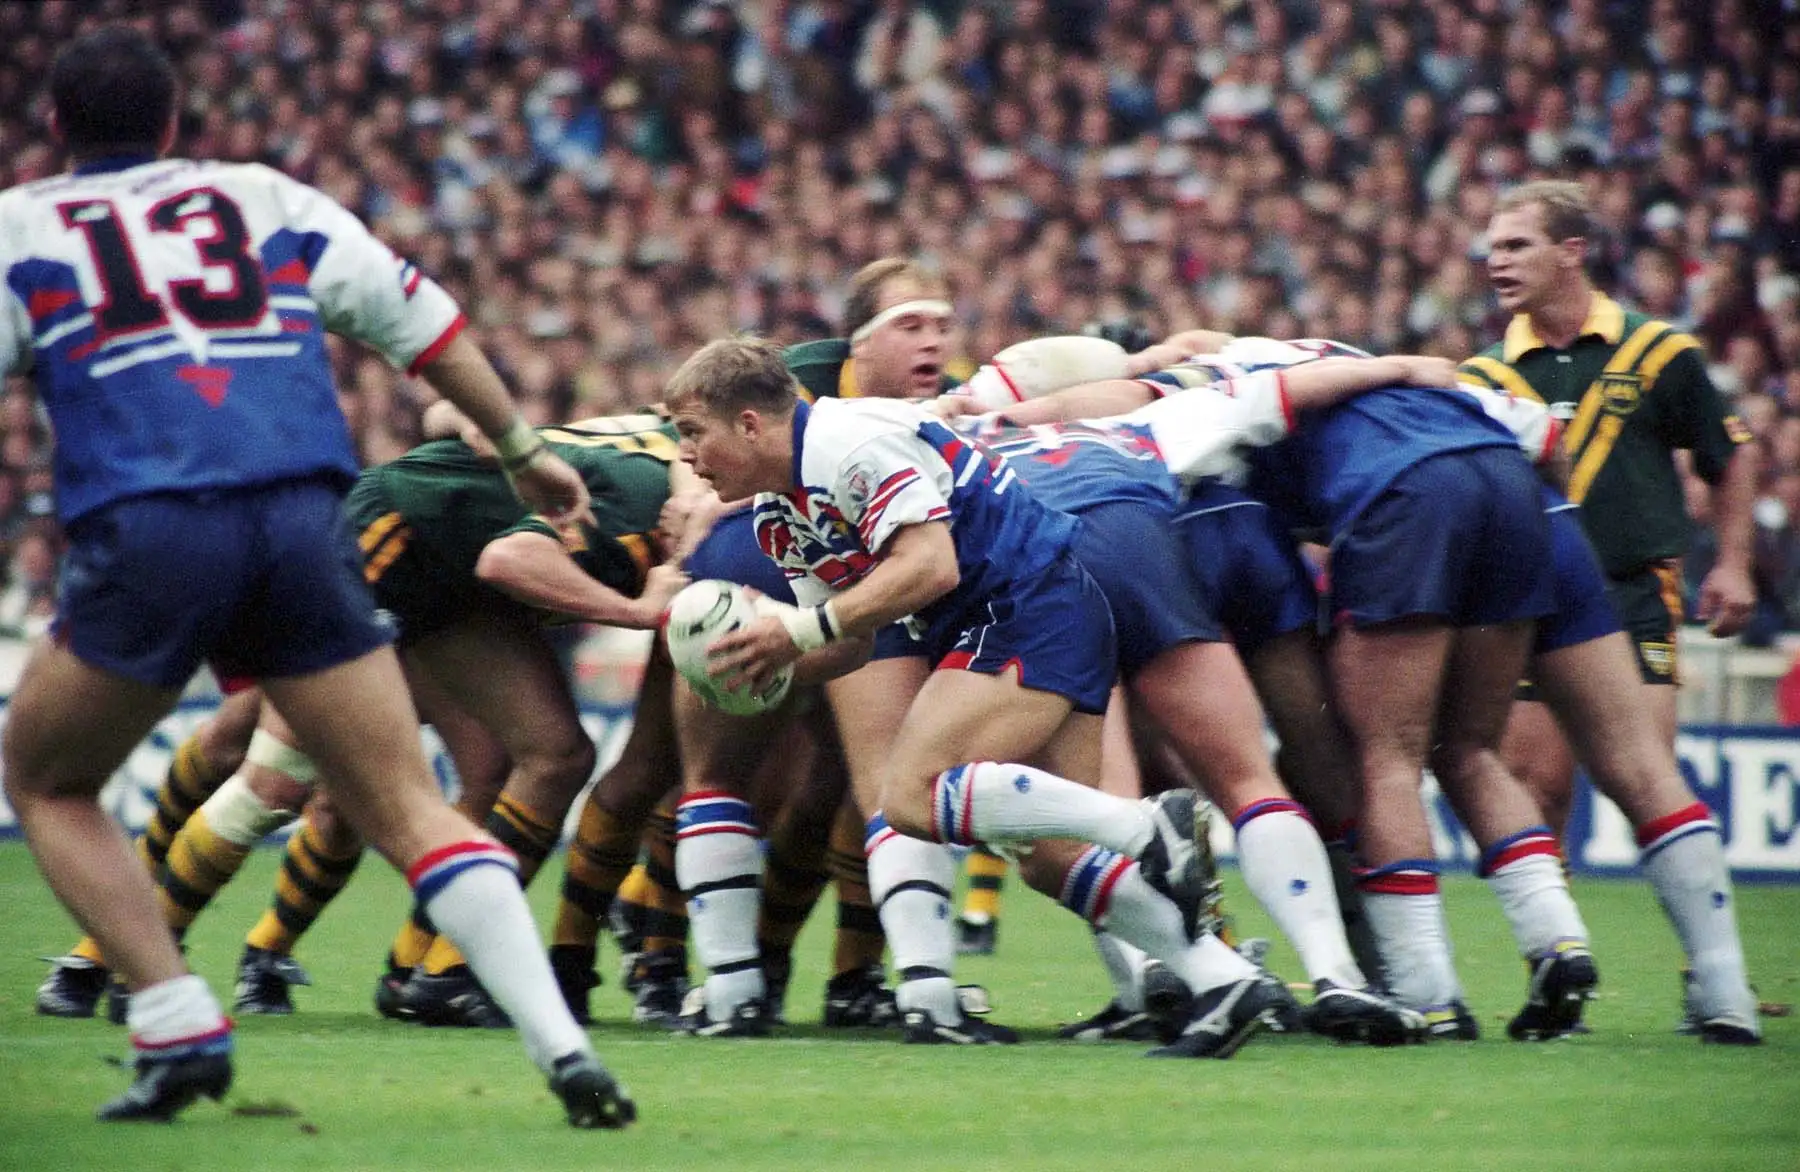 My Set of Six: with broadcaster Phil Kinsella featuring Great Britain icons & Mal Meninga